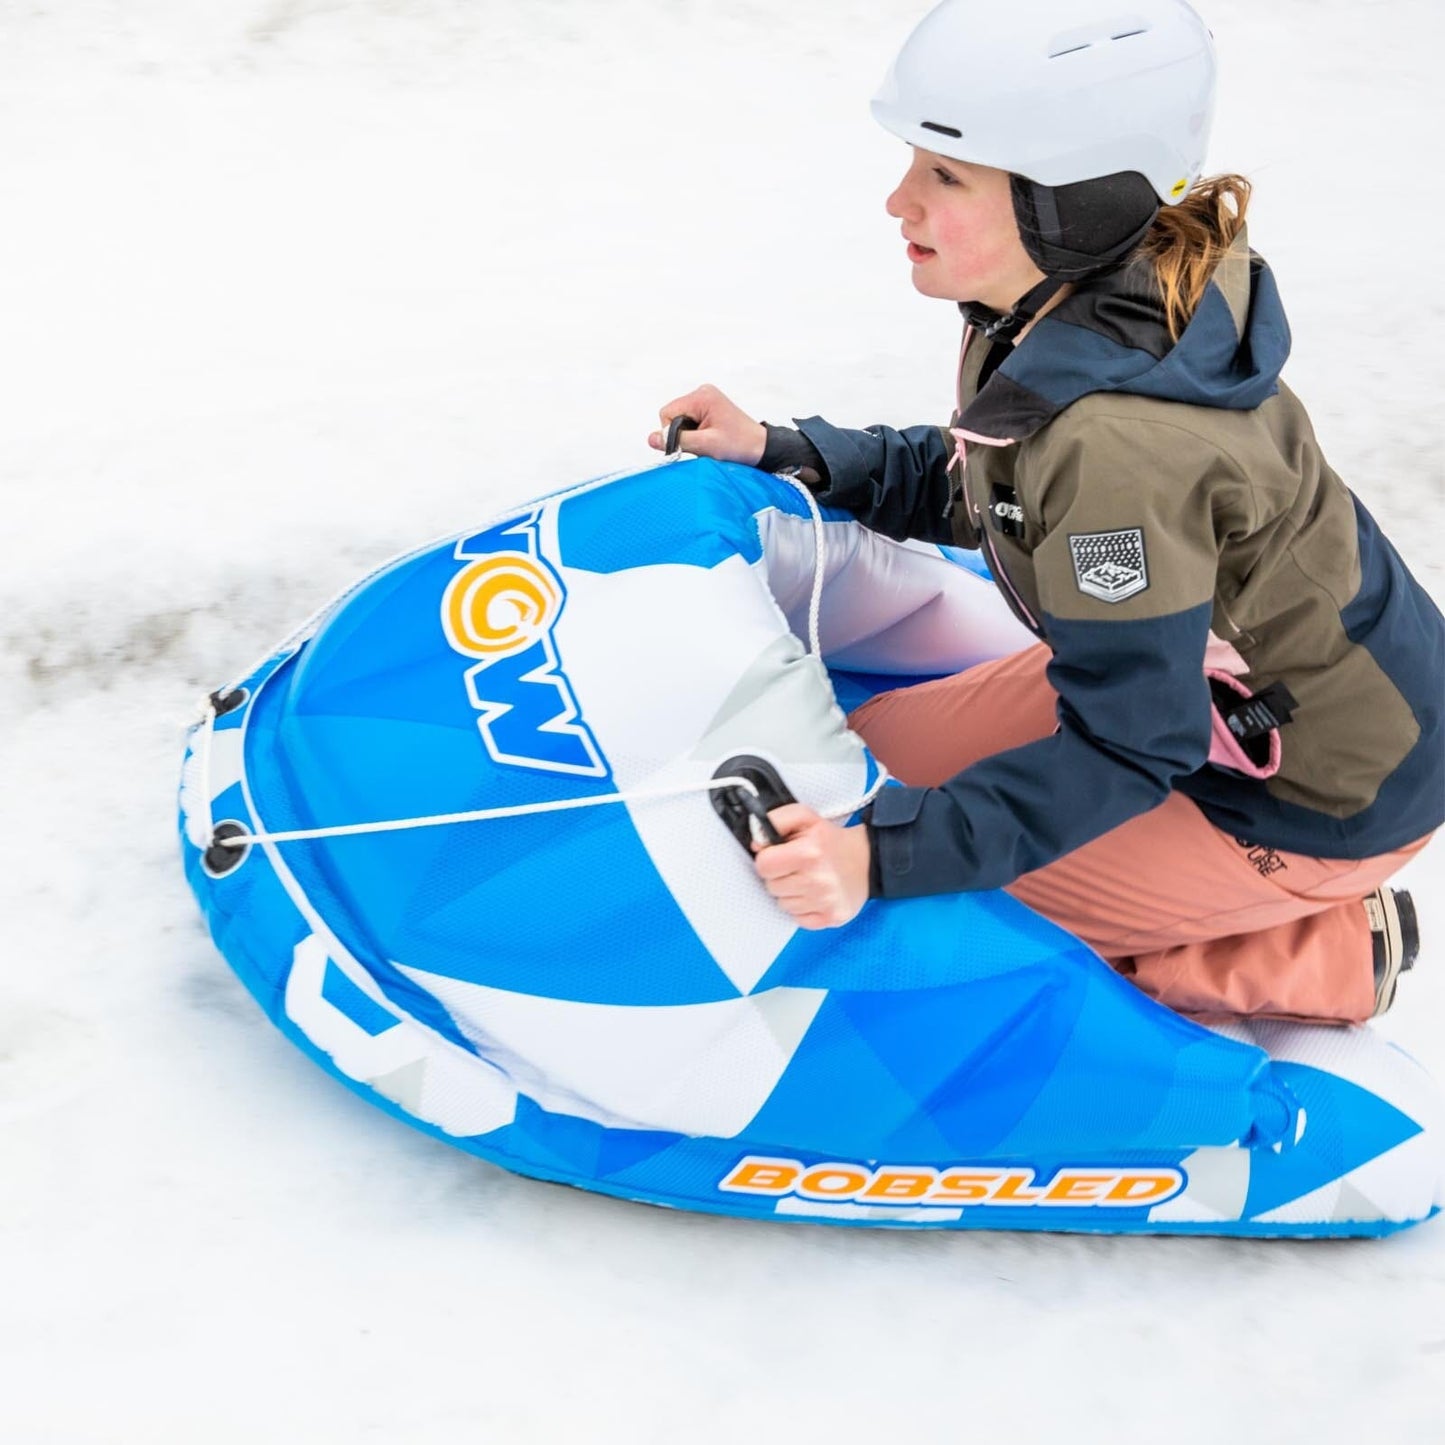 The WOW Bobsled Snow Tube